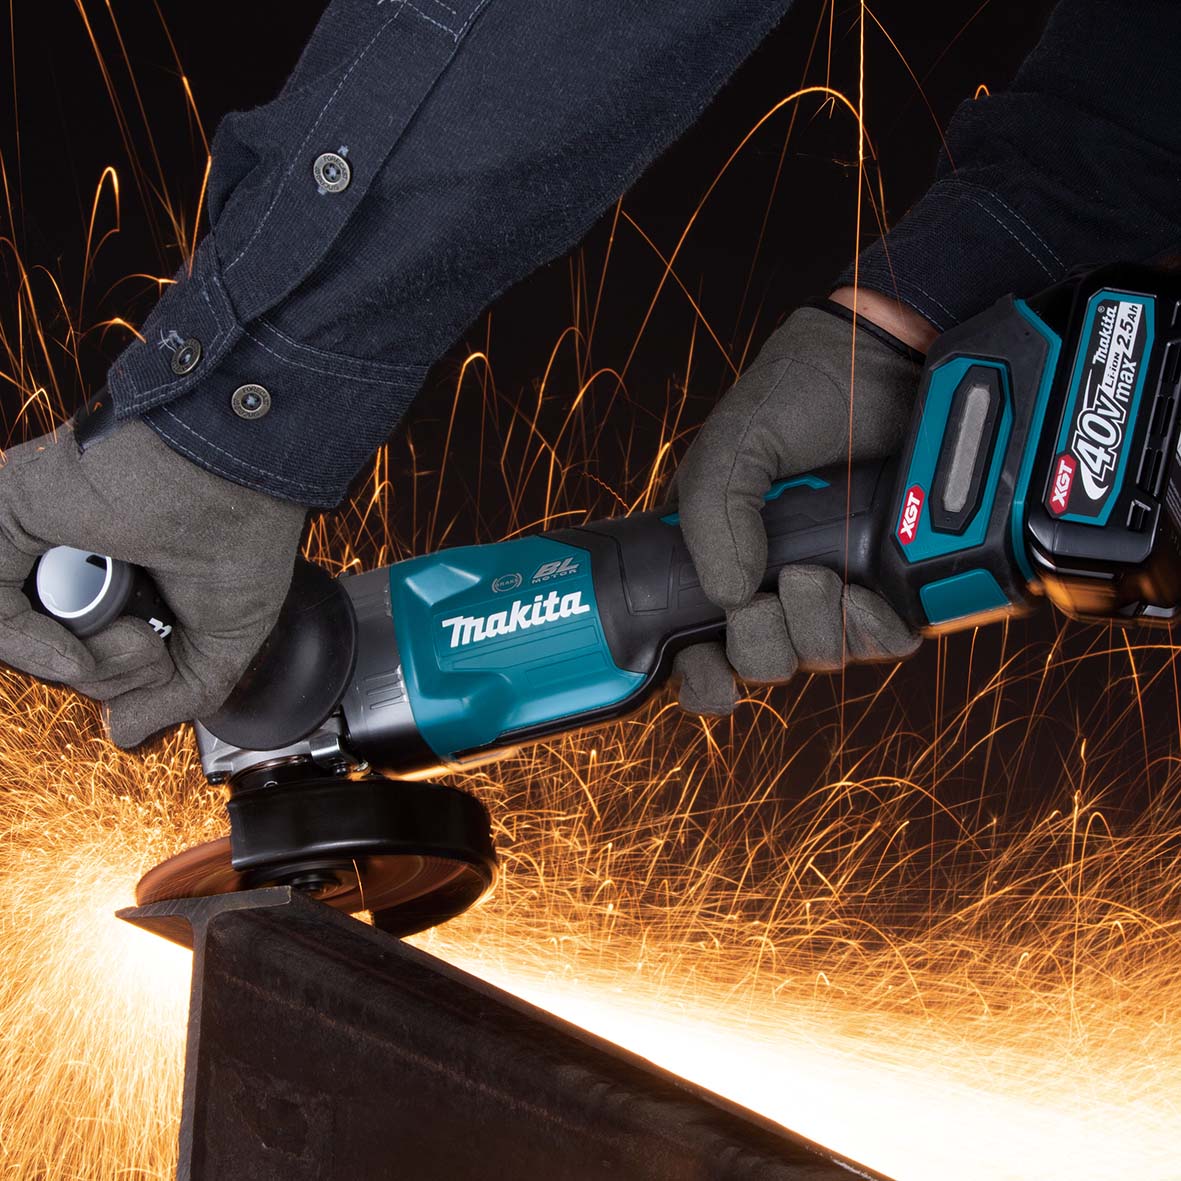 40V 125mm (5") Brushless Paddle Switch Angle Grinder Bare (Tool Only) GA013GZ by Makita